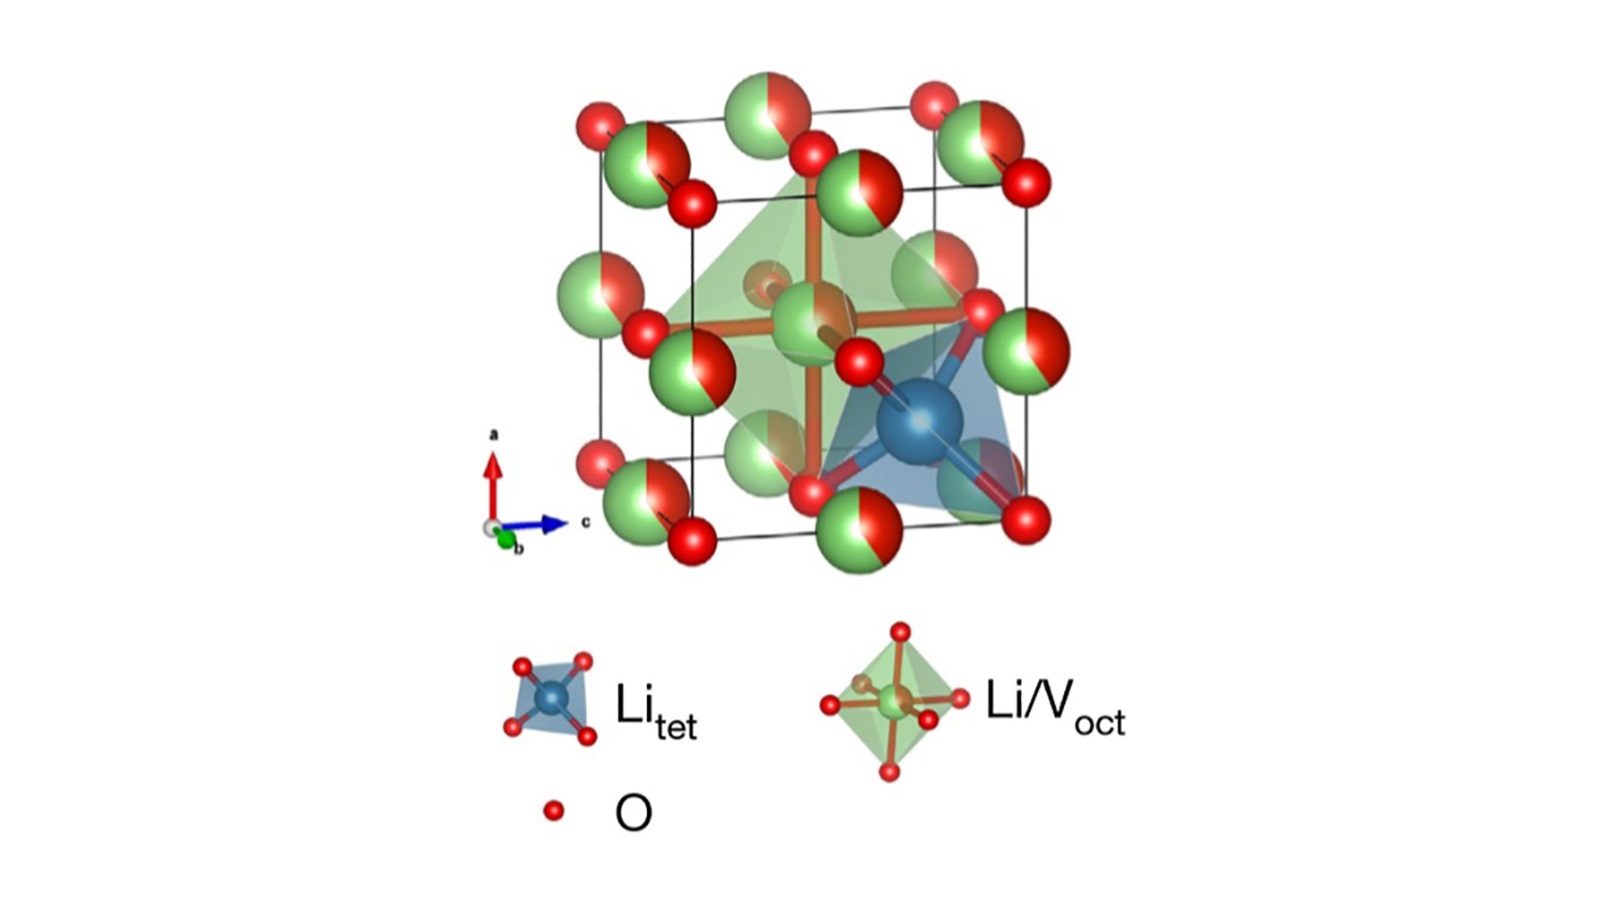 The crystal structure of disordered rocksalt Li3V2O5. The red balls represent oxygen, the blue tetrahedron represents lithium in tetrahedral sites, and the green octahedron represents the lithium/vanadium shared octahedral sites. (Image by University of California San Diego.)